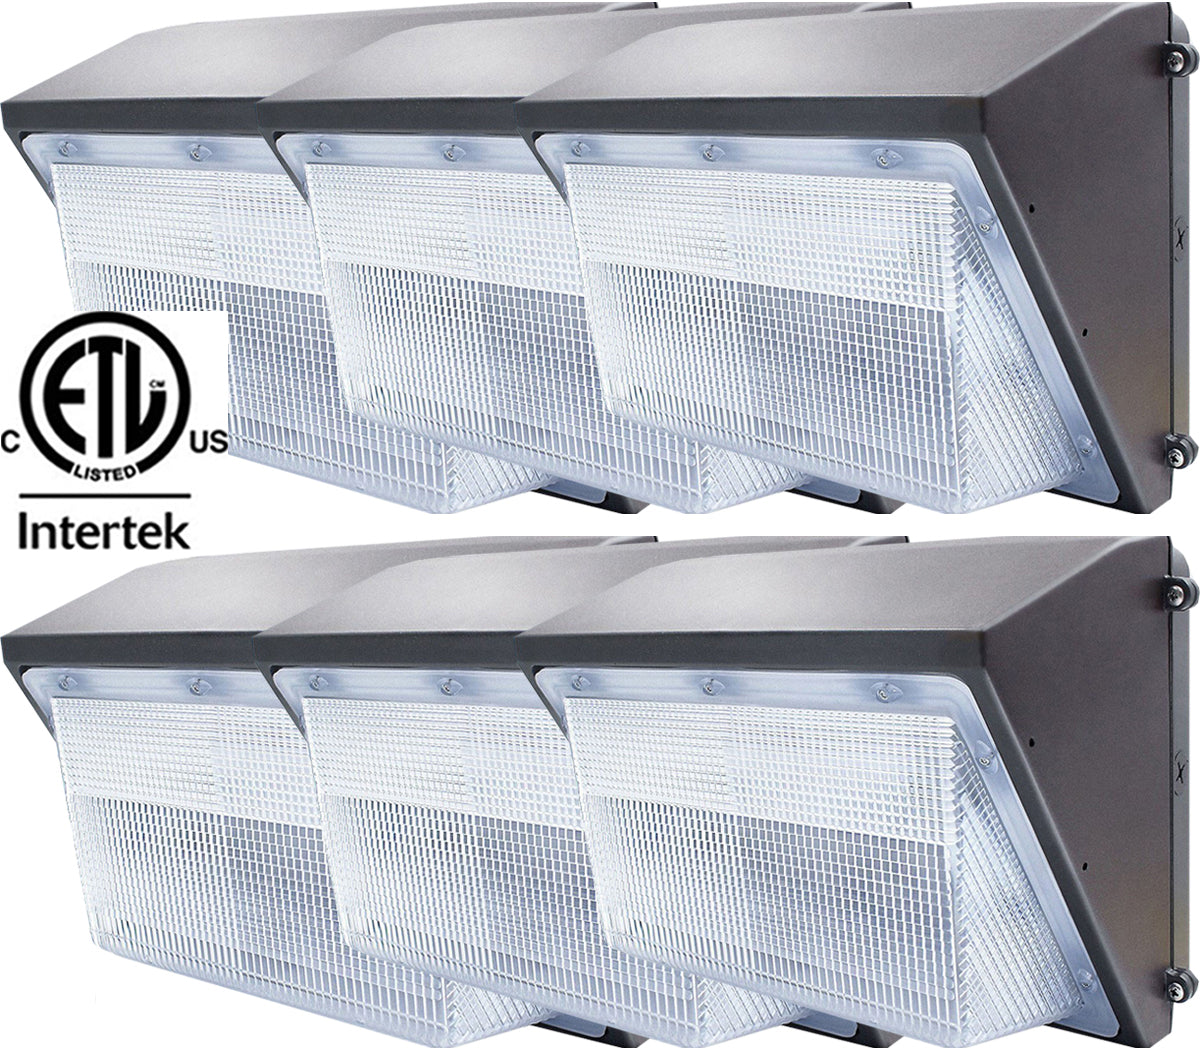 Led Wall Pack 5000k, Canada 100V-347V 6 pack 100w Dusk to Dawn Outdoor Yard